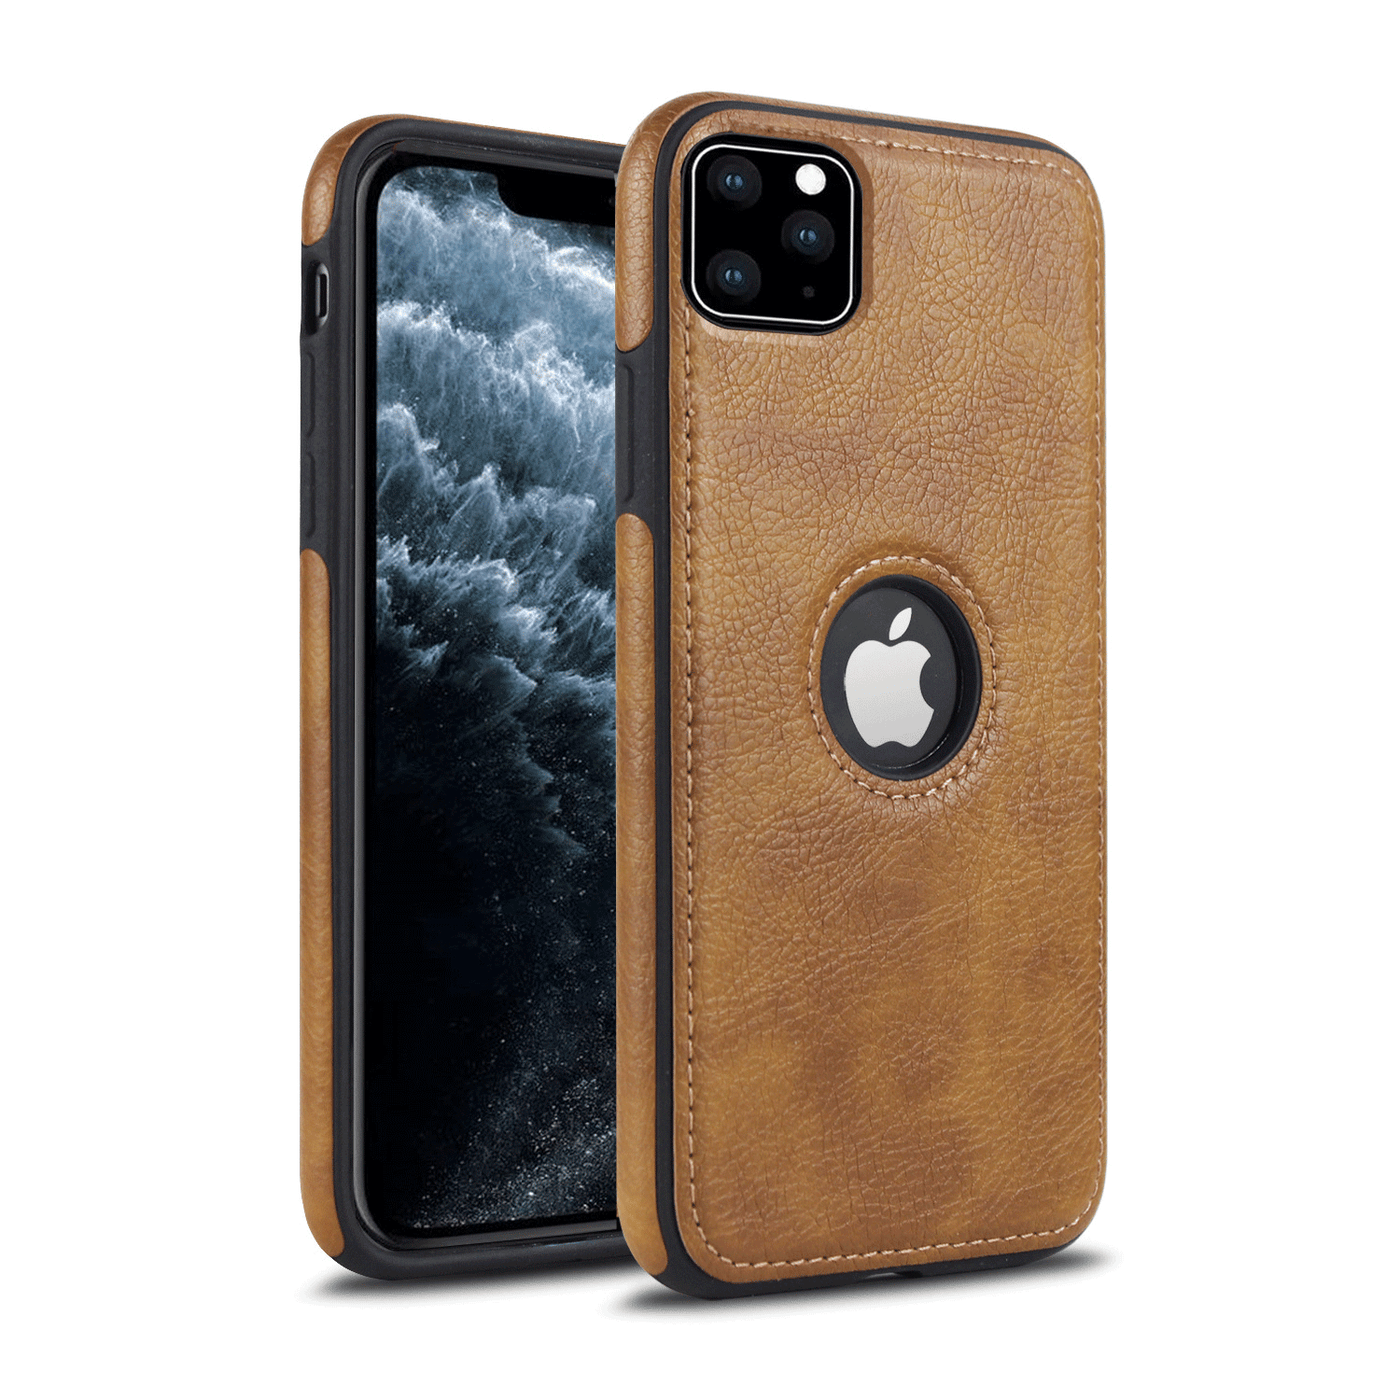 Apple iPhone 11 pro max brown leather back cover by excelsior